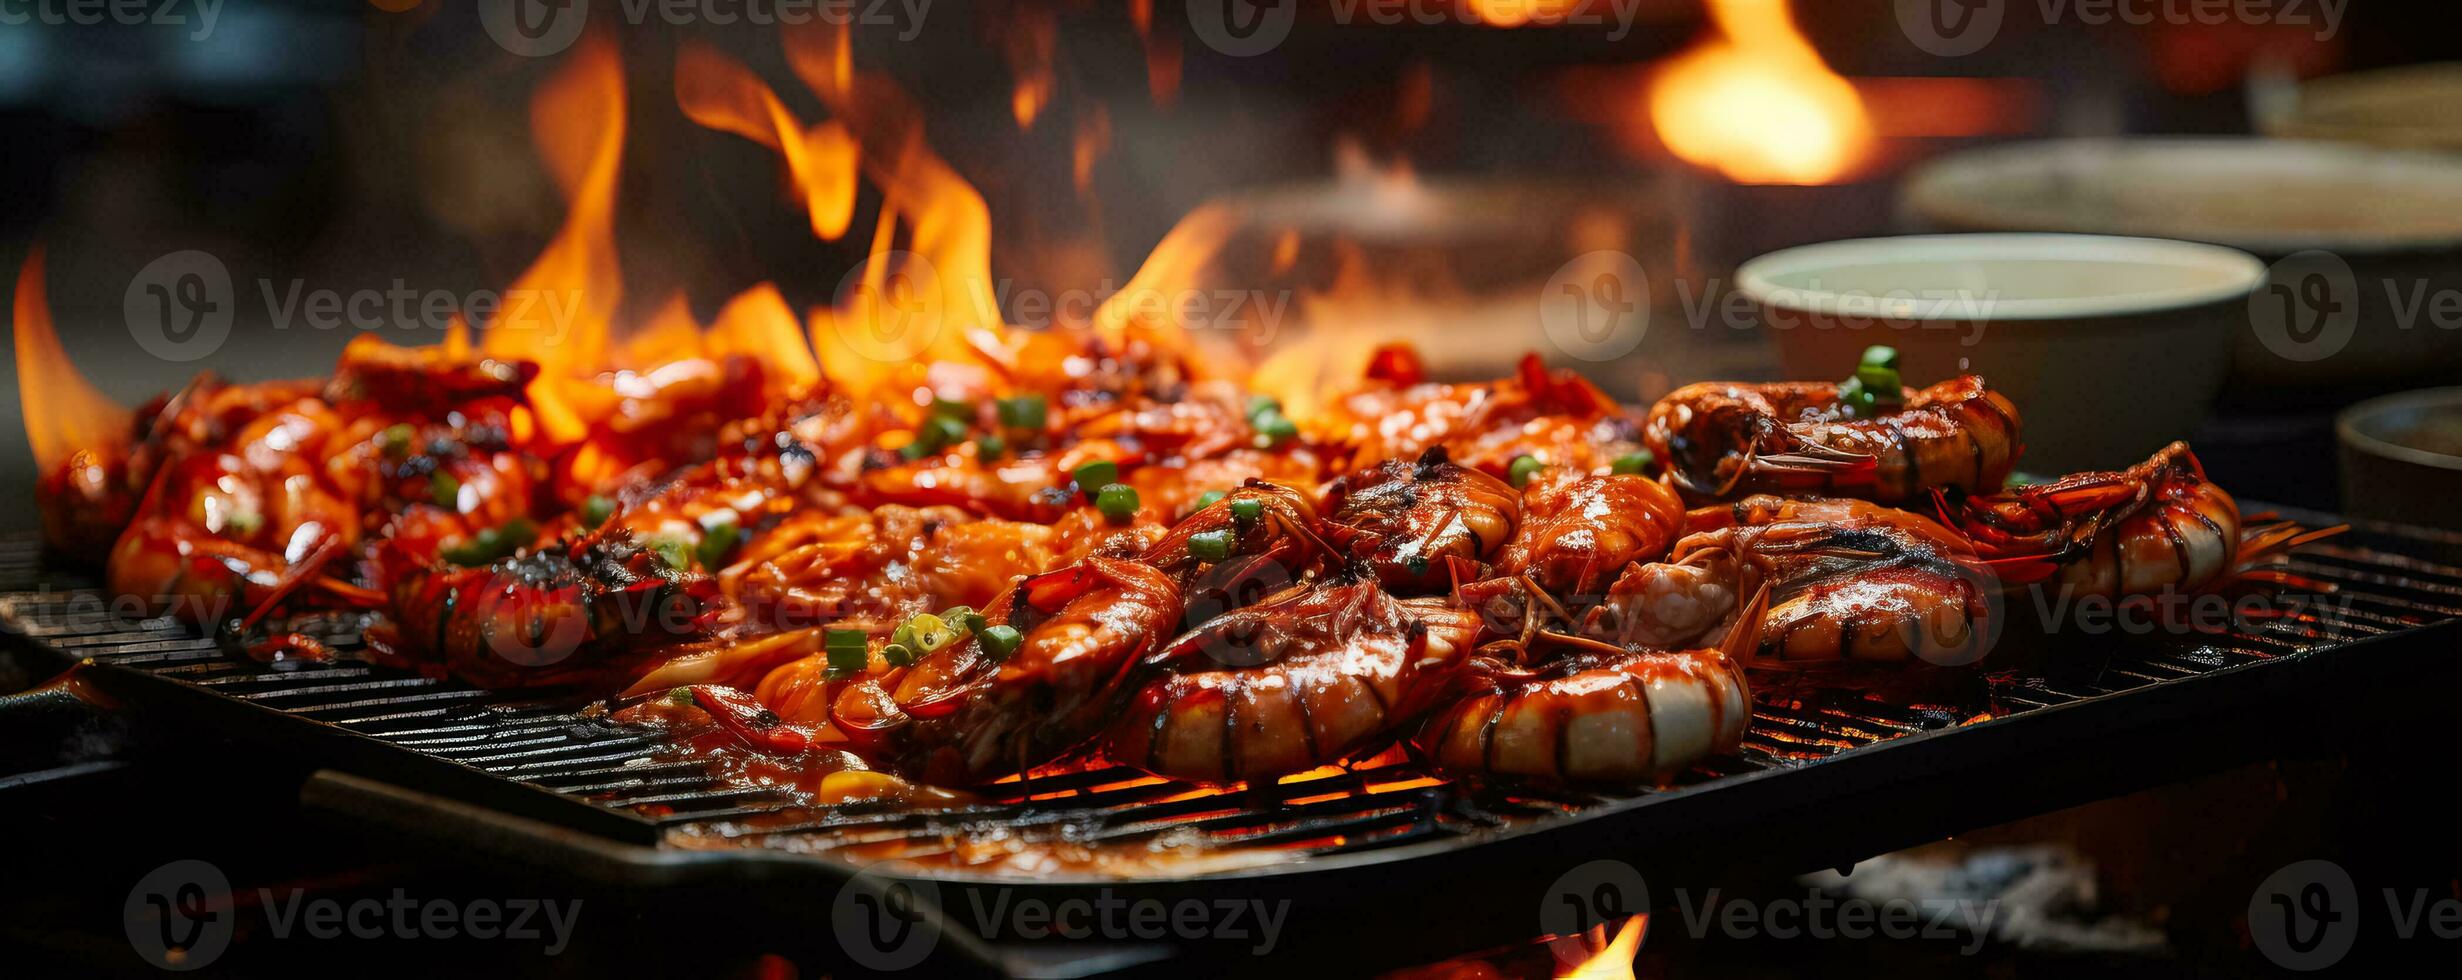 A close-up shot capturing the sizzling flames and aromatic steam as skilled chefs prepare mouthwatering seafood delicacies photo